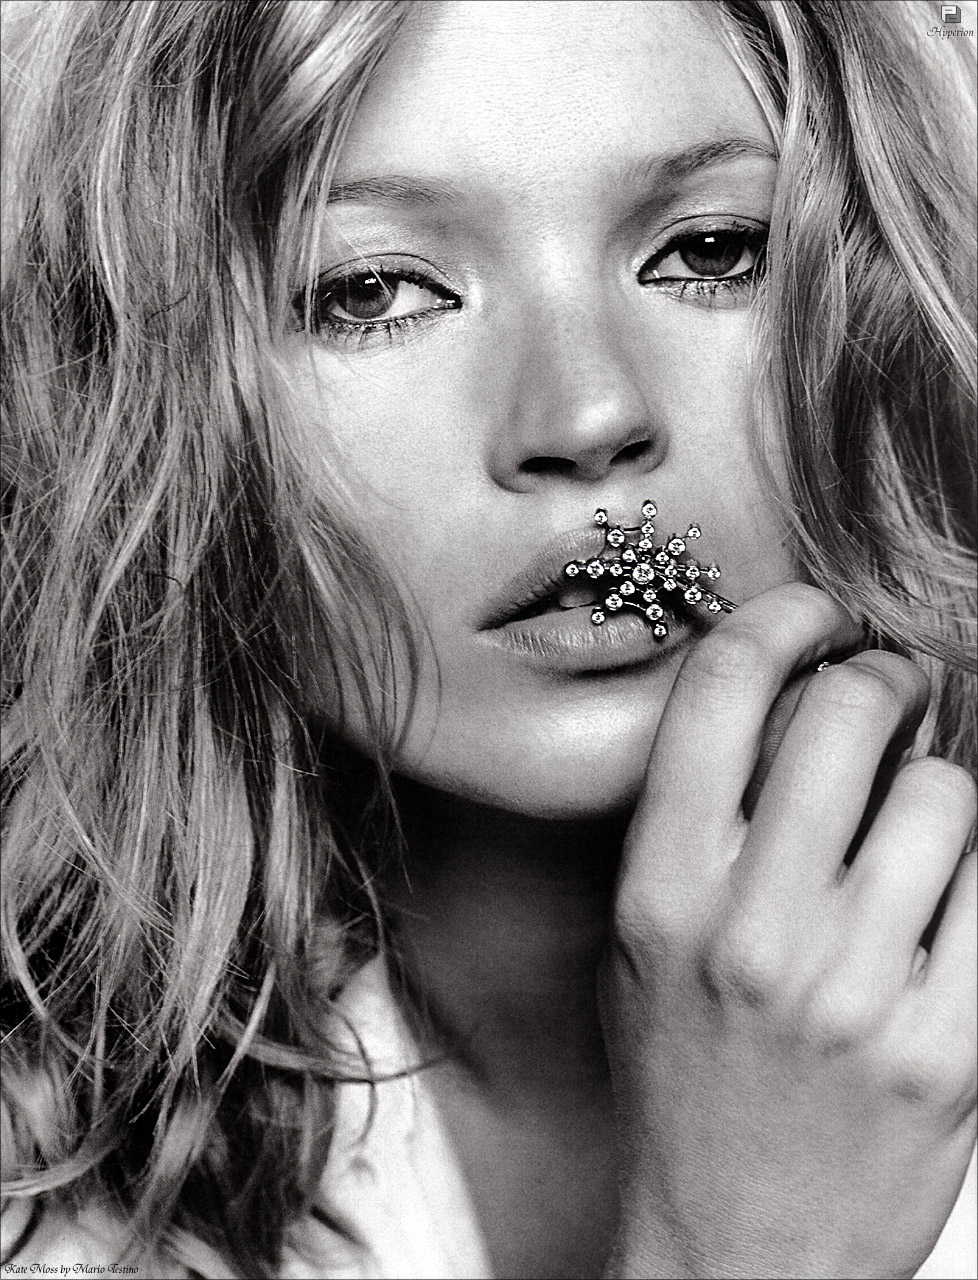 Kate Moss photo 11 of 2313 pics, wallpaper - photo #4766 - ThePlace2